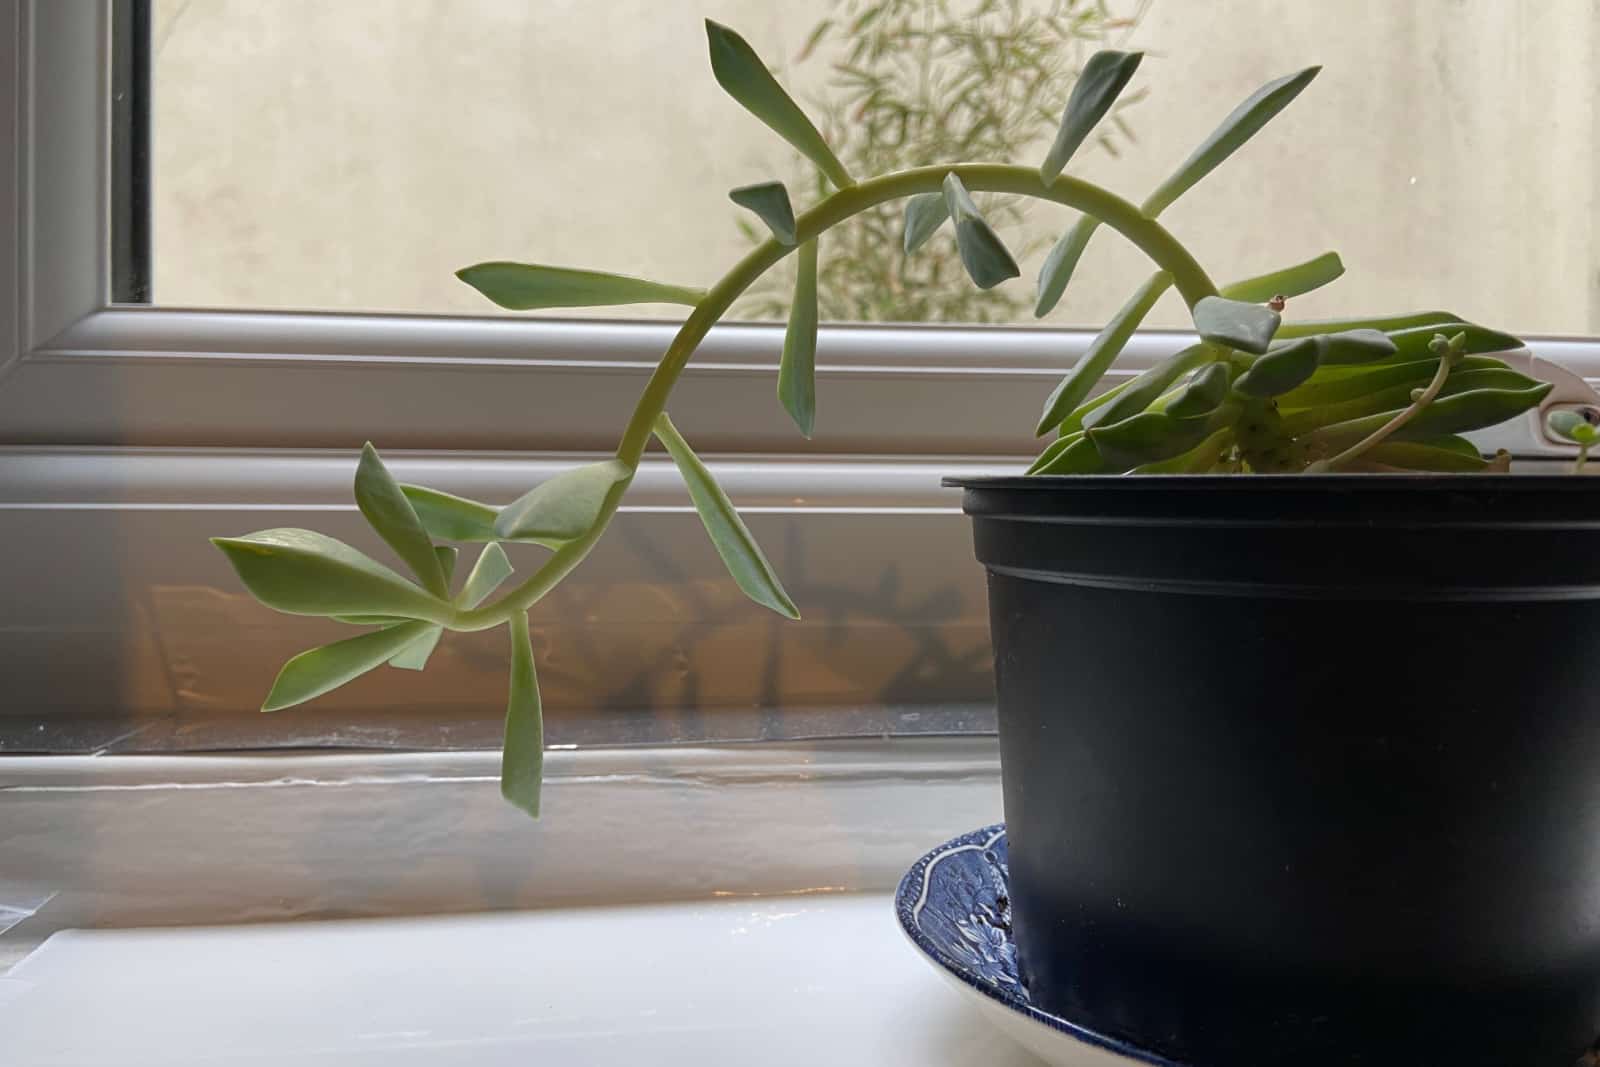 A succulent plant with widely spread leggy leaves and stem indicate it is stretching for light